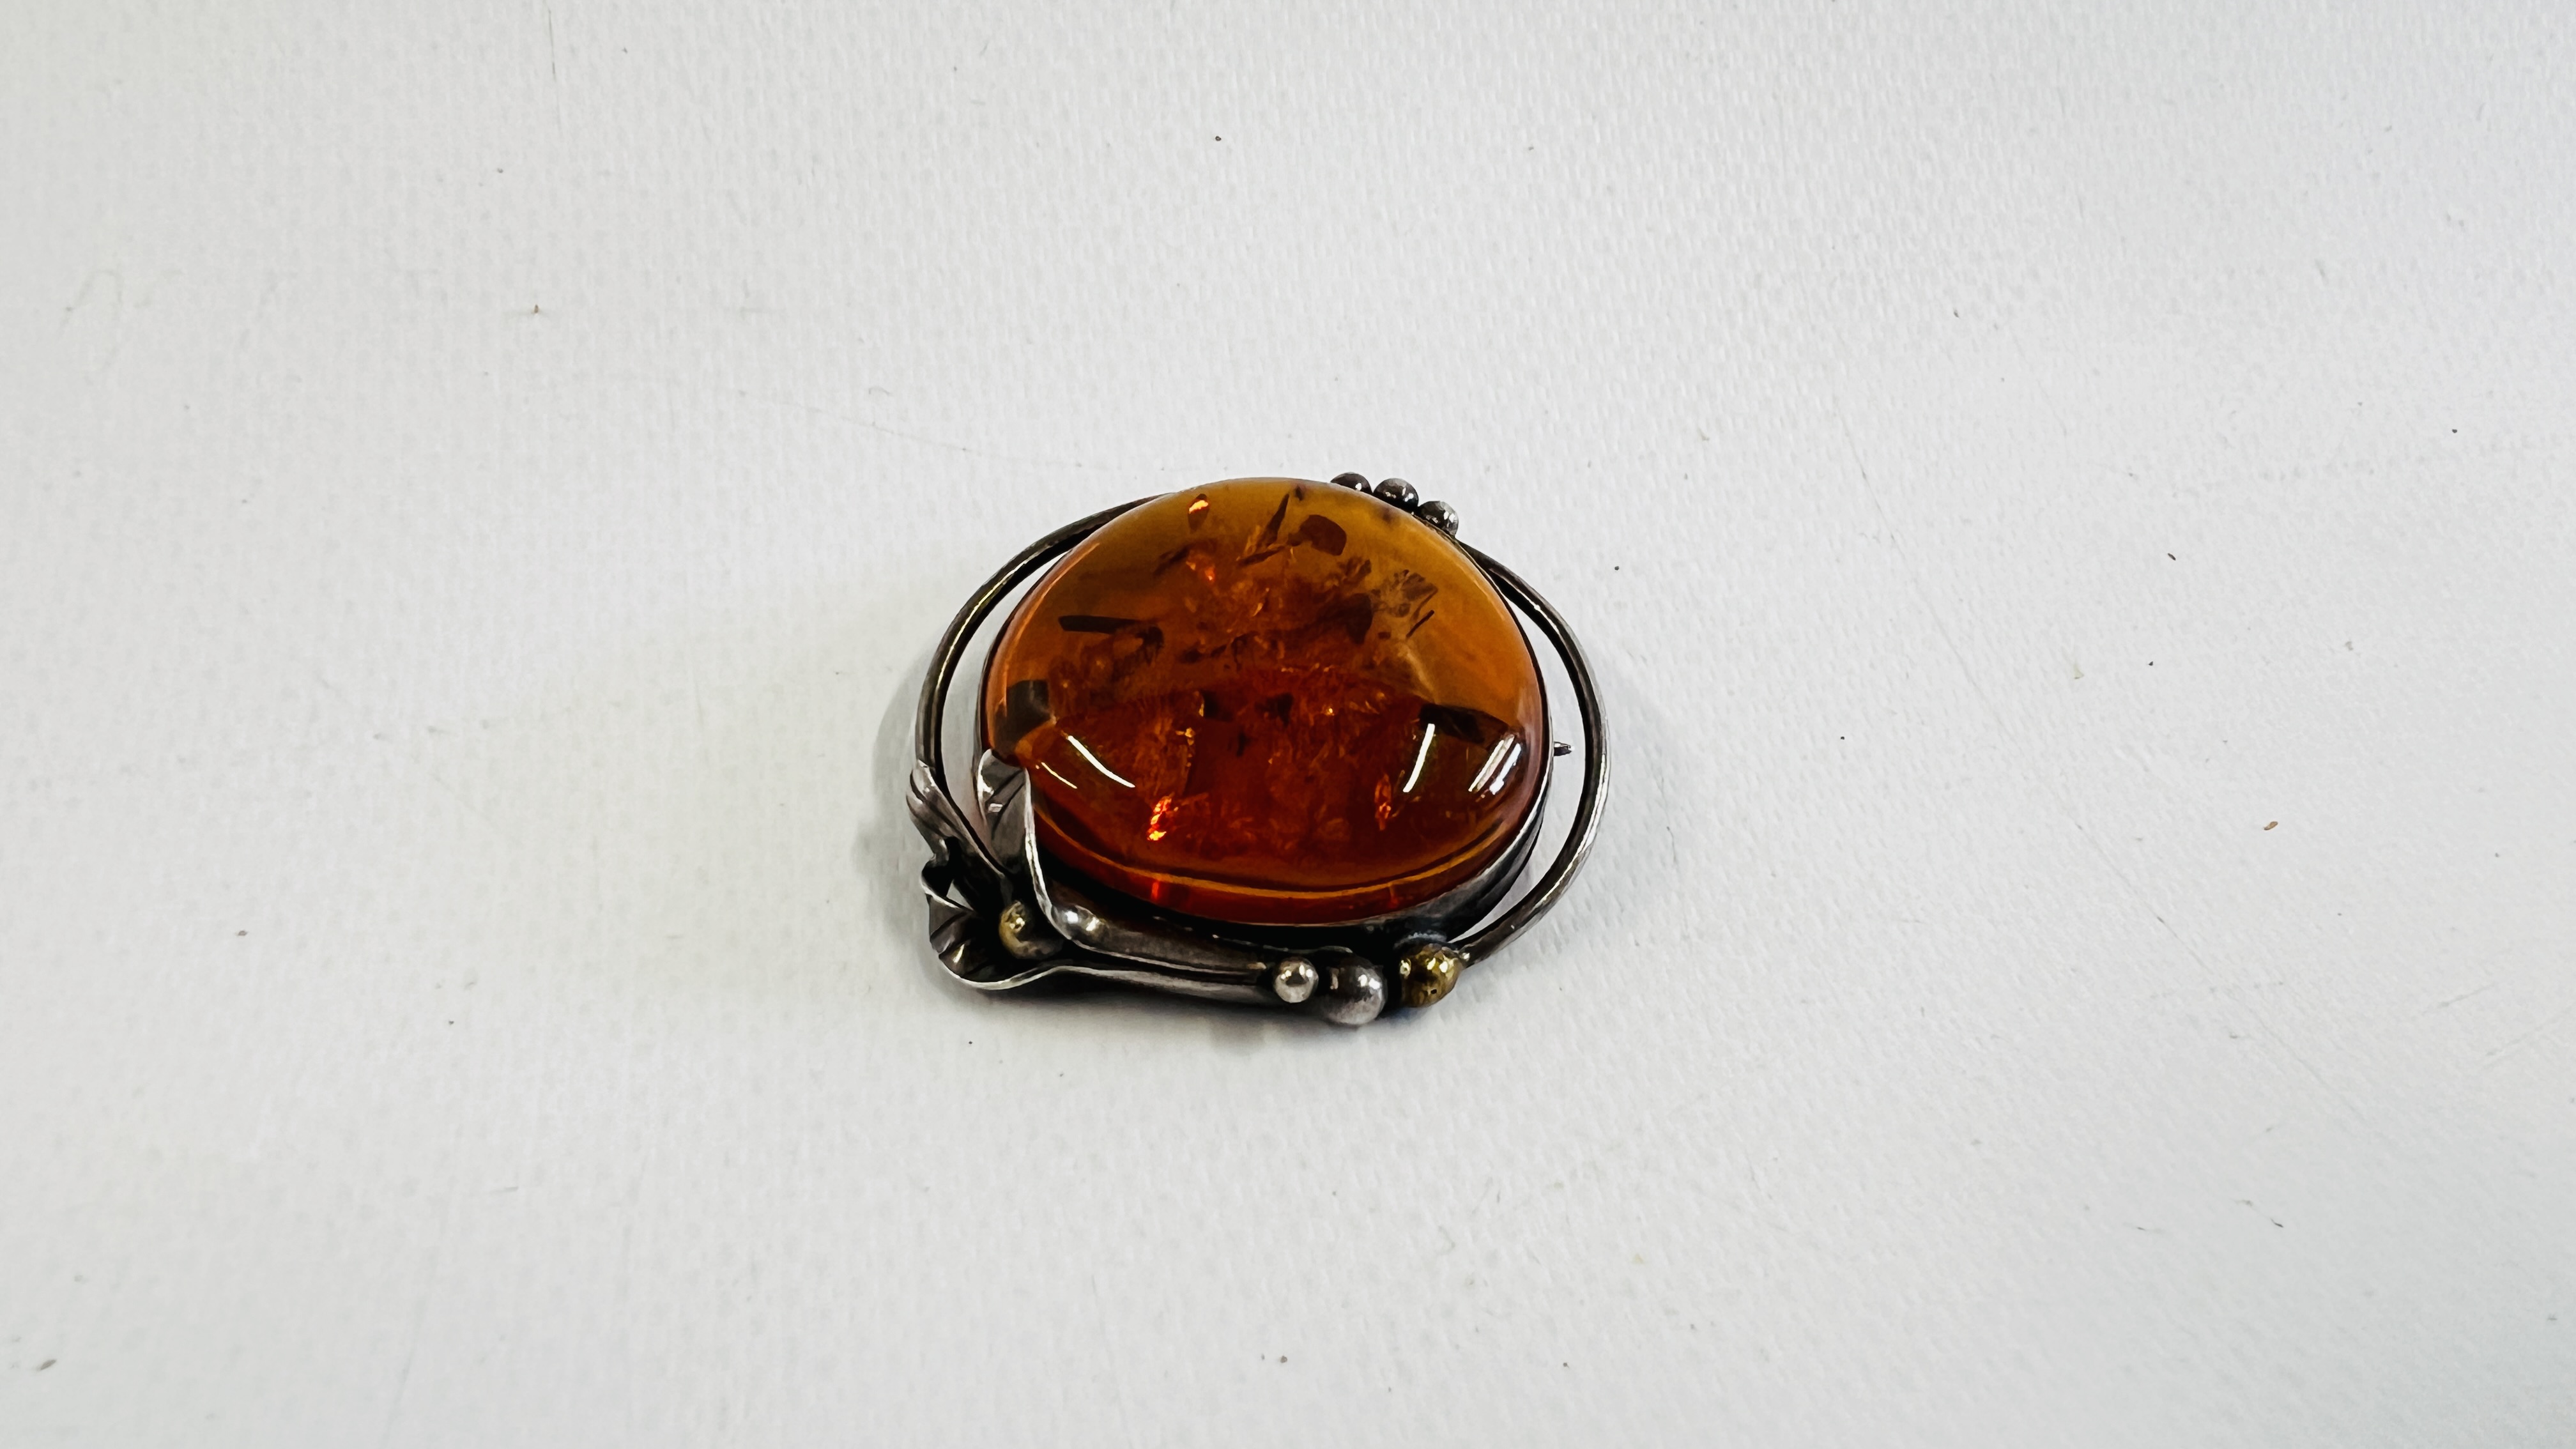 A VINTAGE SILVER BROOCH INSET WITH AN AMBER TYPE STONE.